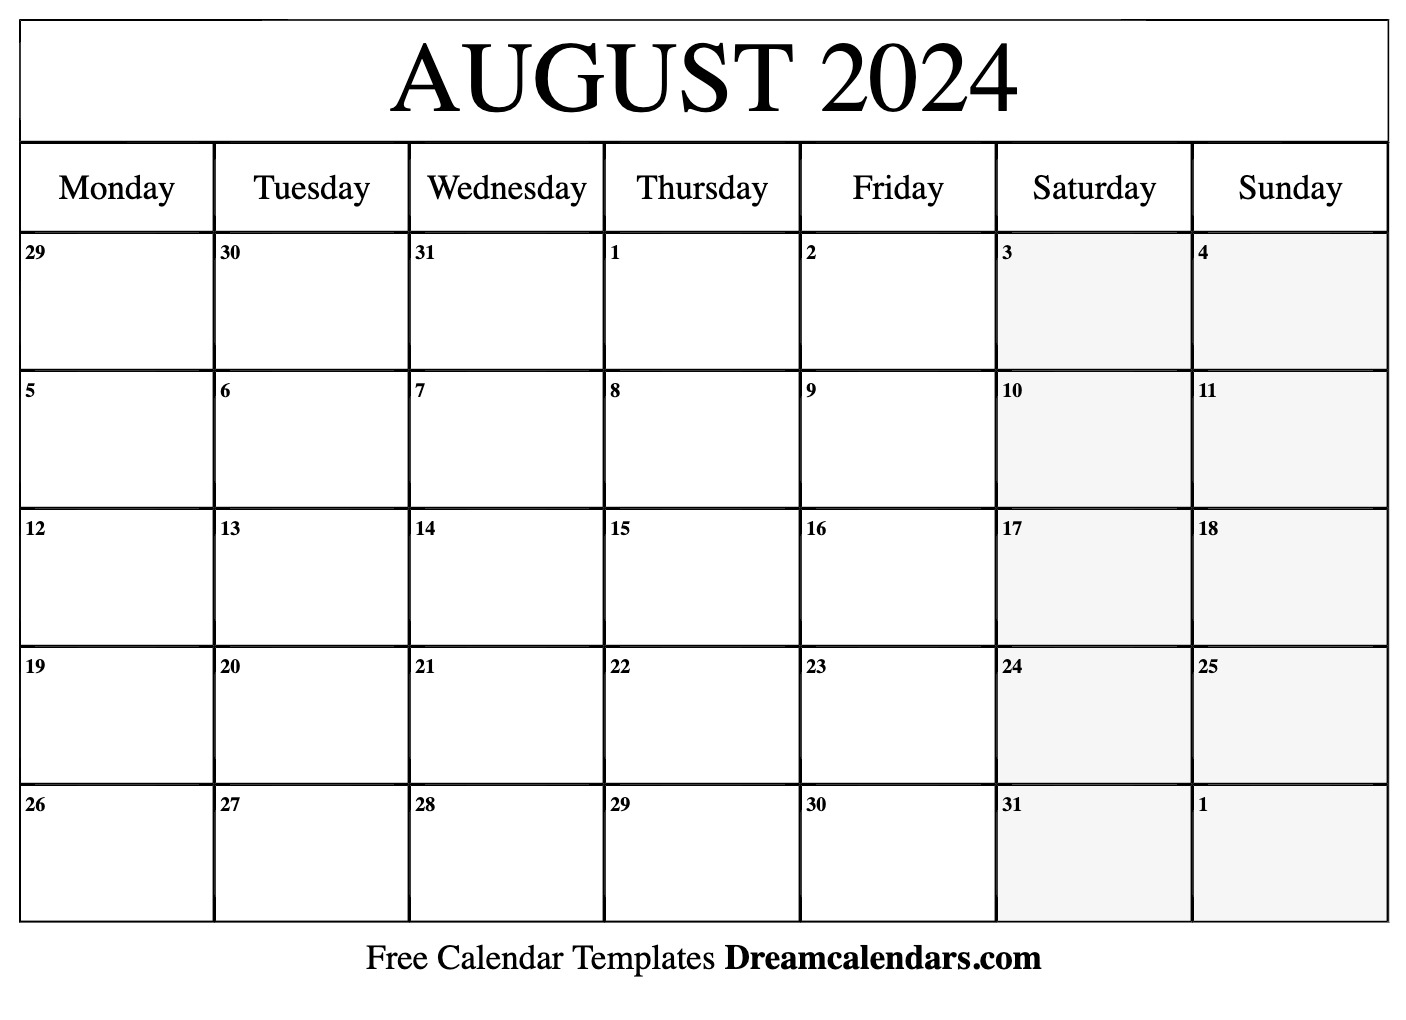 August 2024 Calendar | Free Blank Printable With Holidays for May-August 2024 Calendar Printable